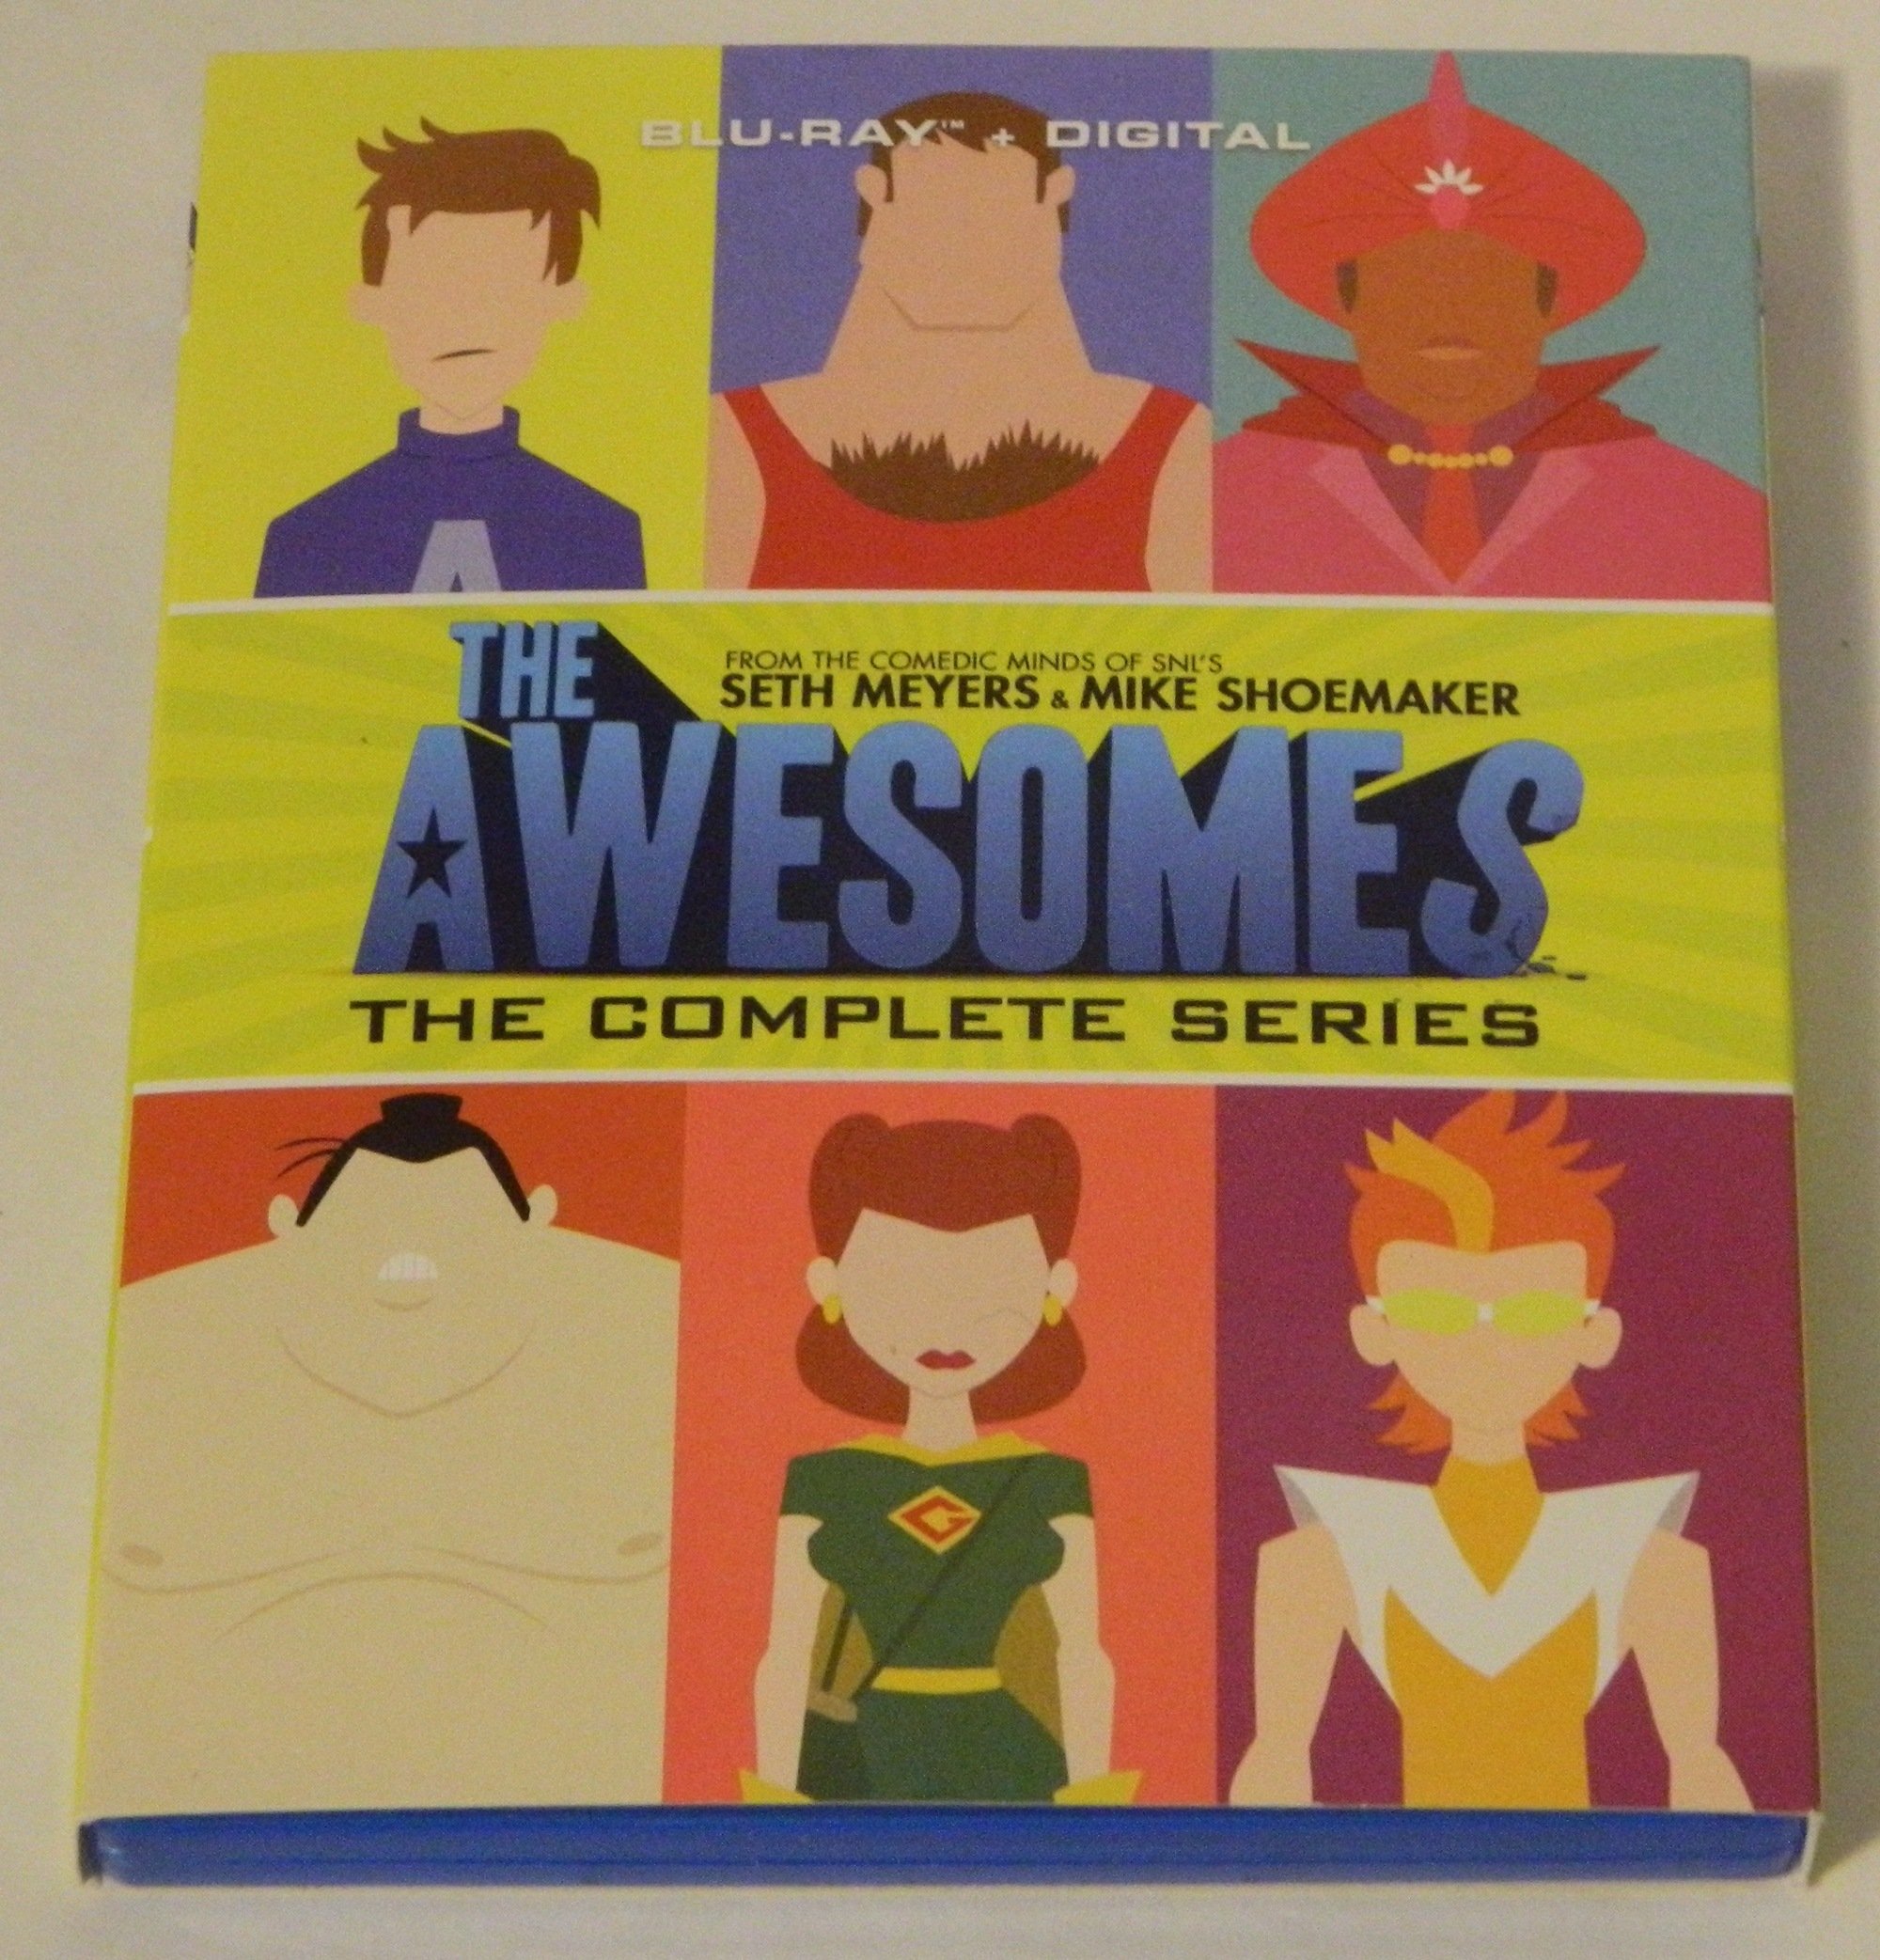 The Awesomes: The Complete Series Blu-ray Review